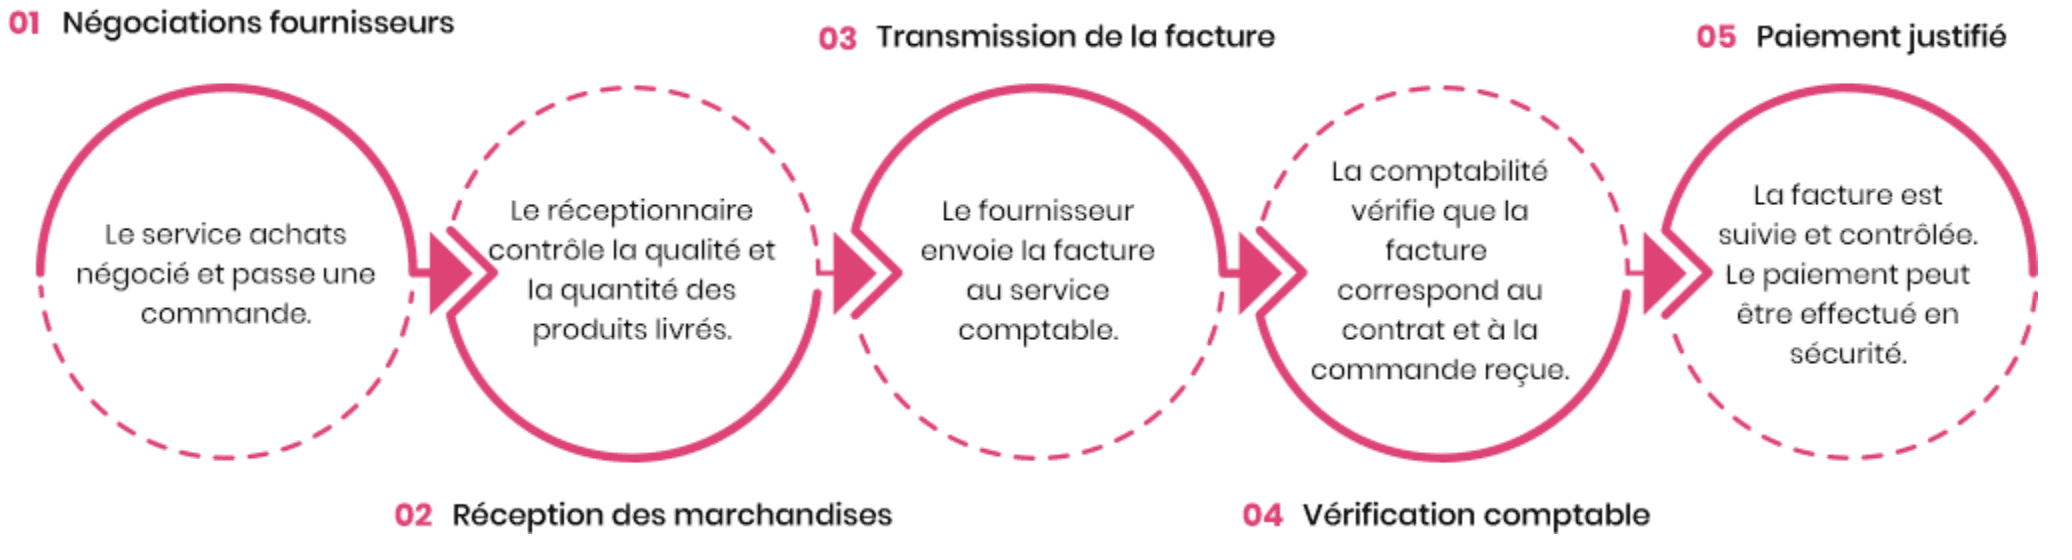 Validations achats et factures Flowin5 SOLUDOC